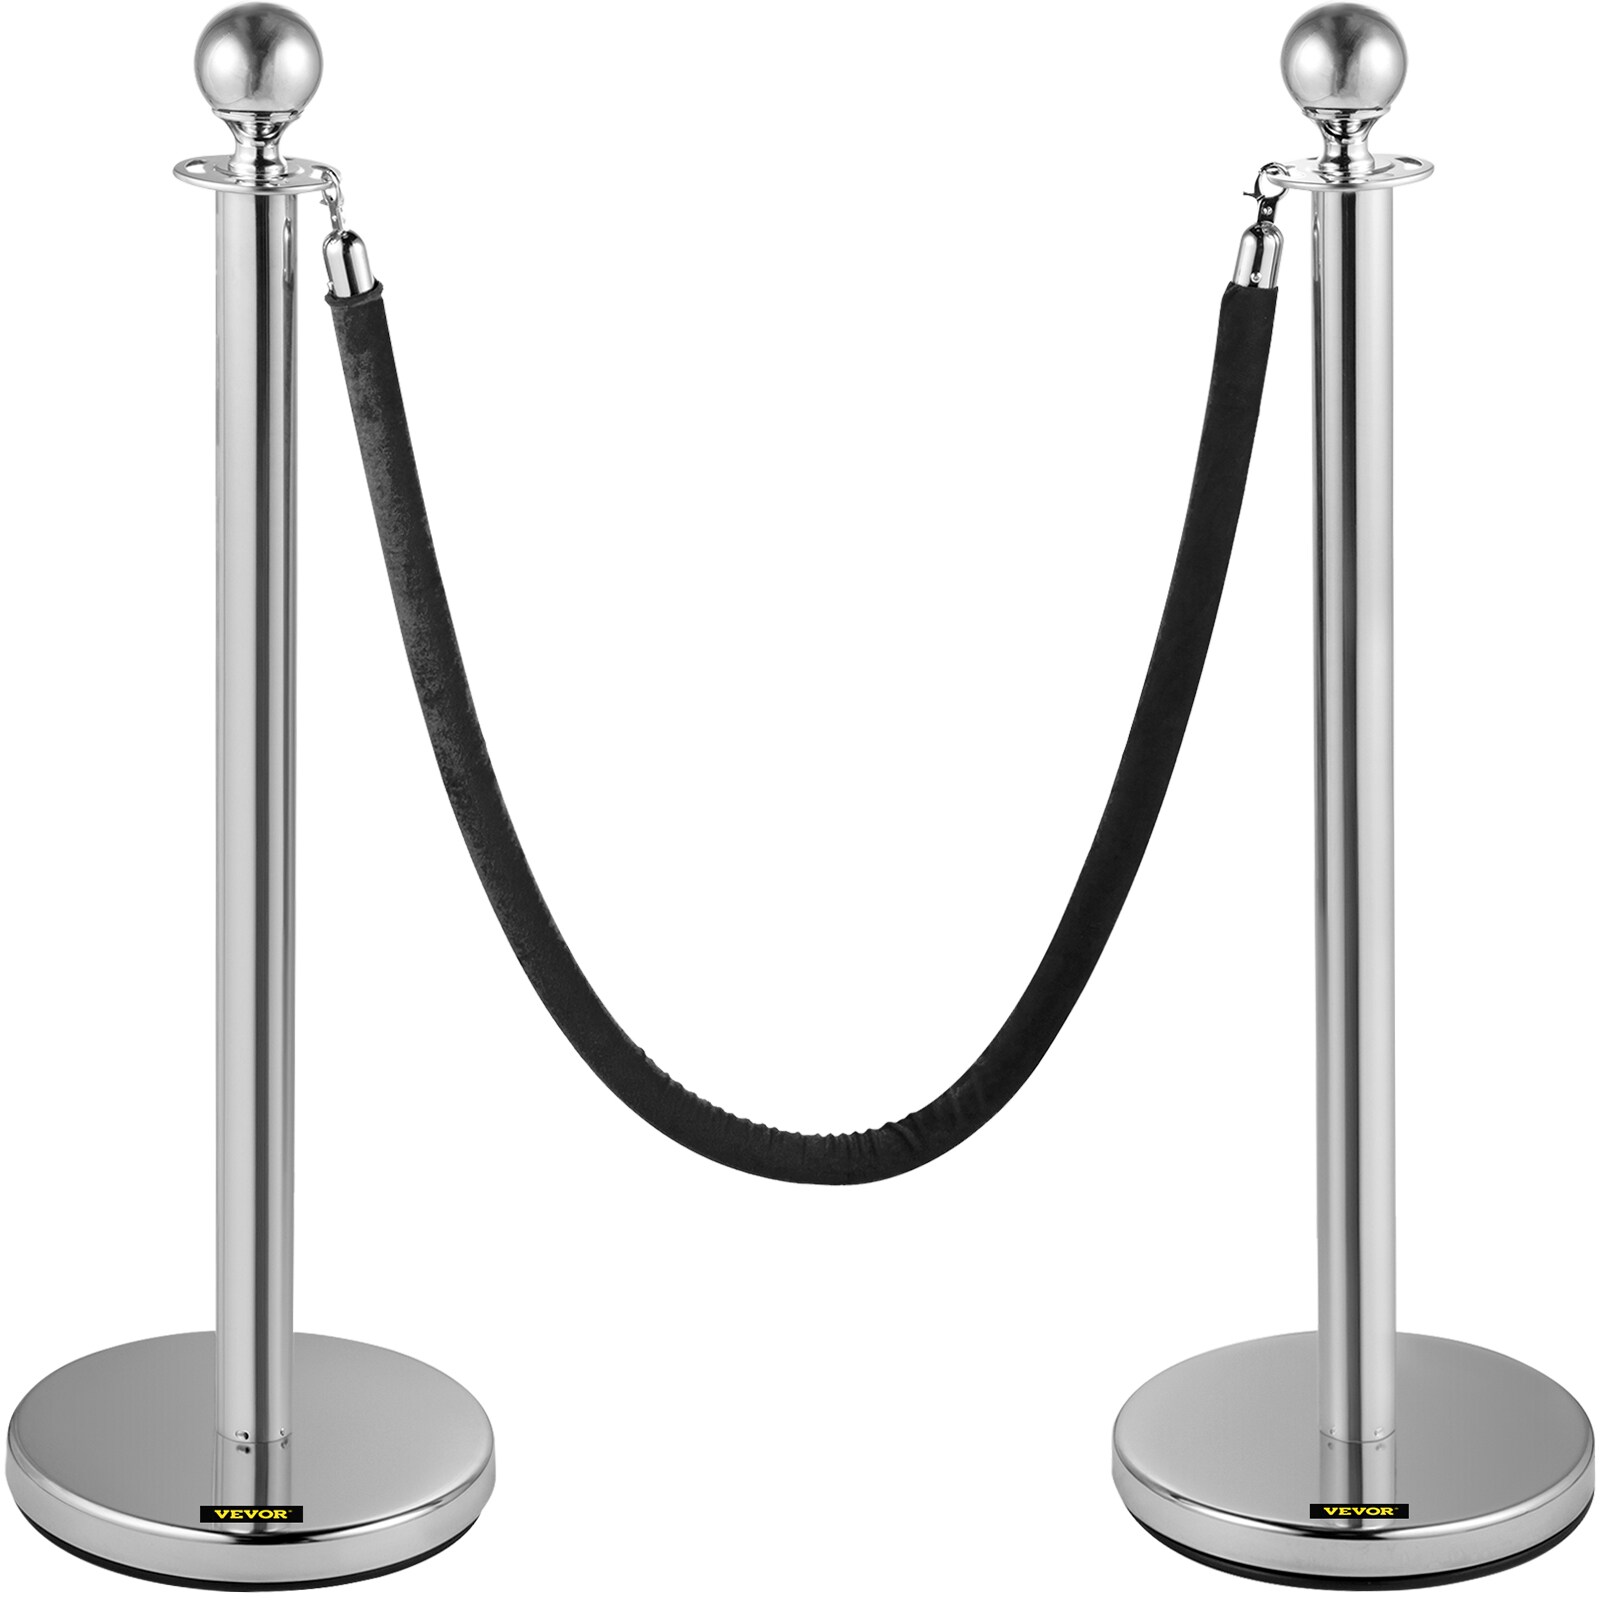 VEVOR 2 Pcs Crowd Control Stanchion 35.4-in x 5-ft Portable Crowd Control Barrier Stainless Steel | GLZYSQTHRSJT2TPDAV0